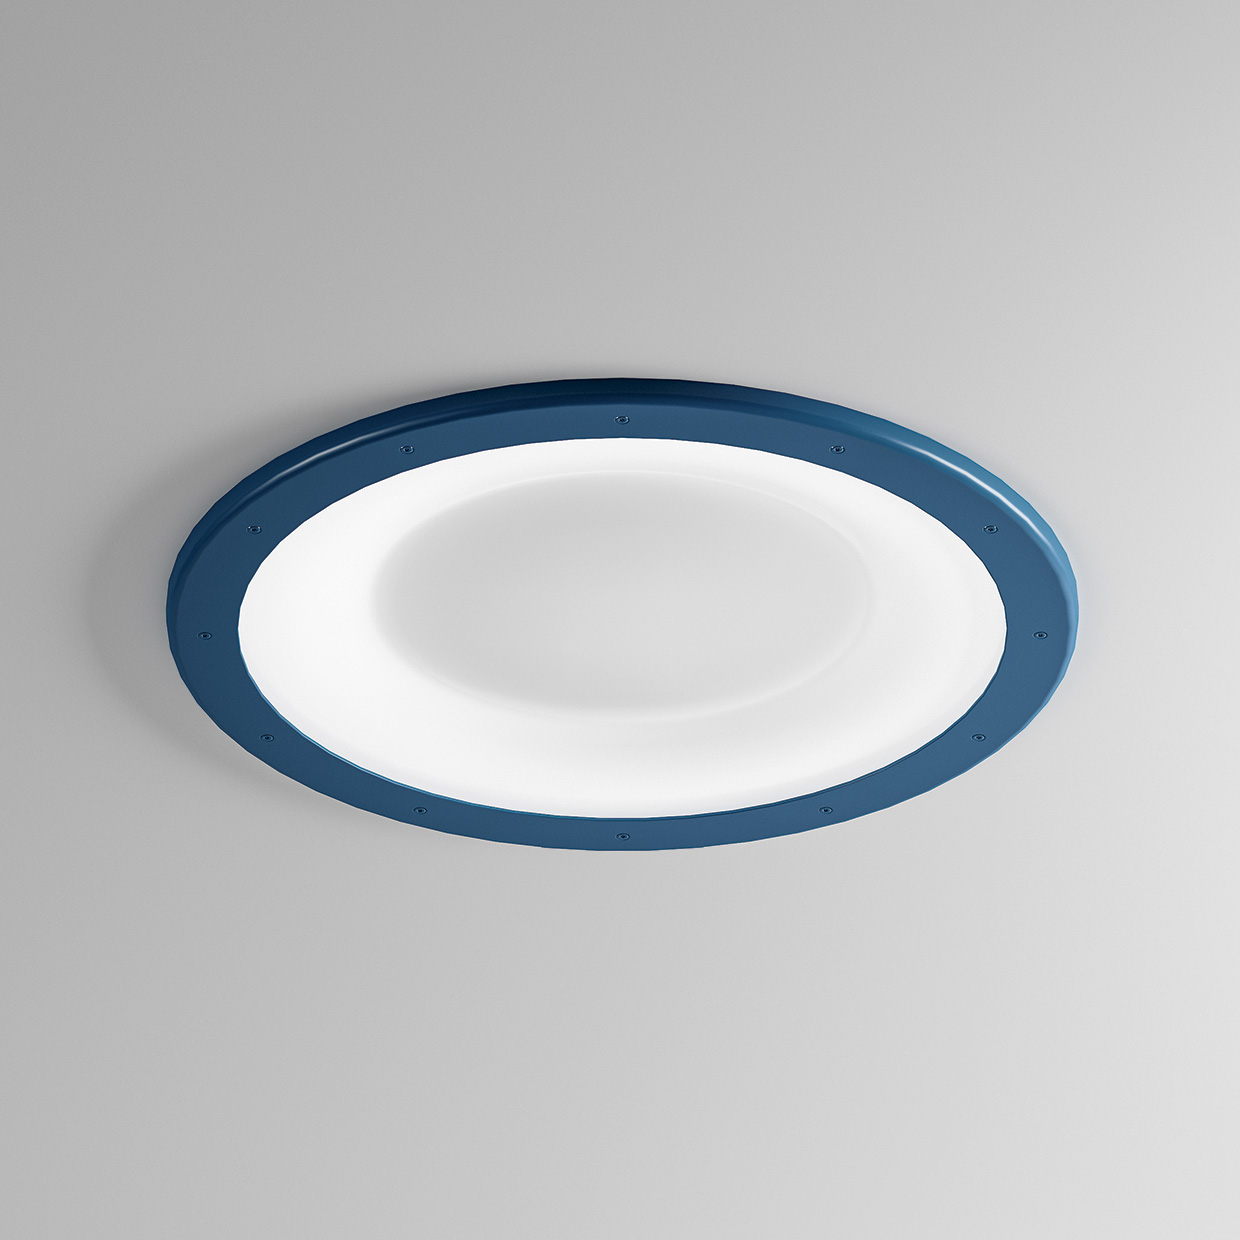 Round ceiling light for behavioral health facilities with polycarbonate lens and blue paint